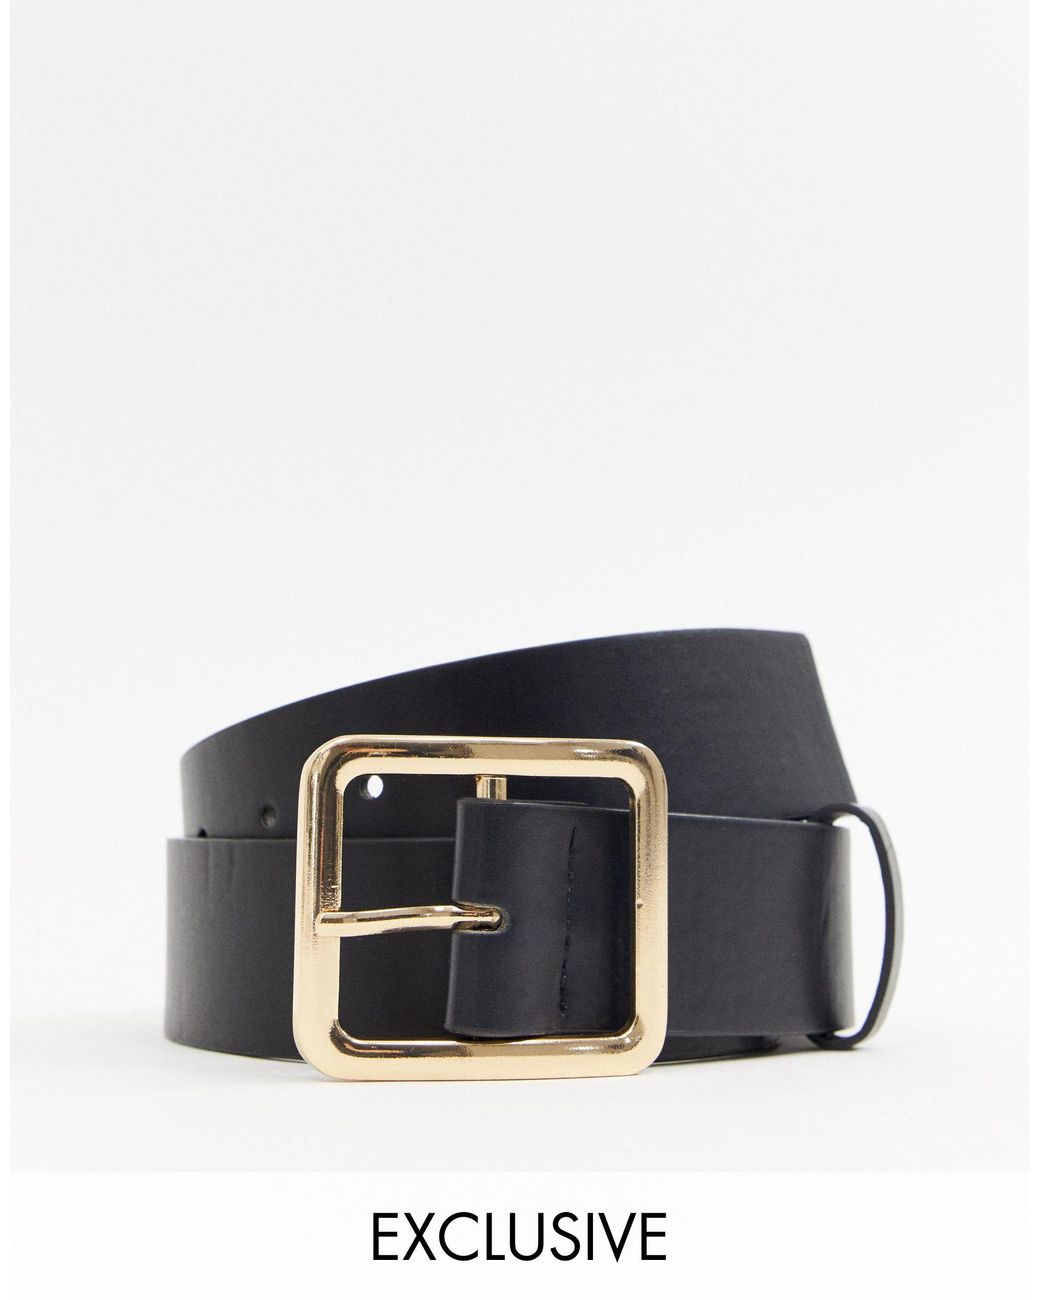 Glamorous Leather Exclusive Waist And Hip Jeans Belt With Gold Square  Buckle in Black | Lyst